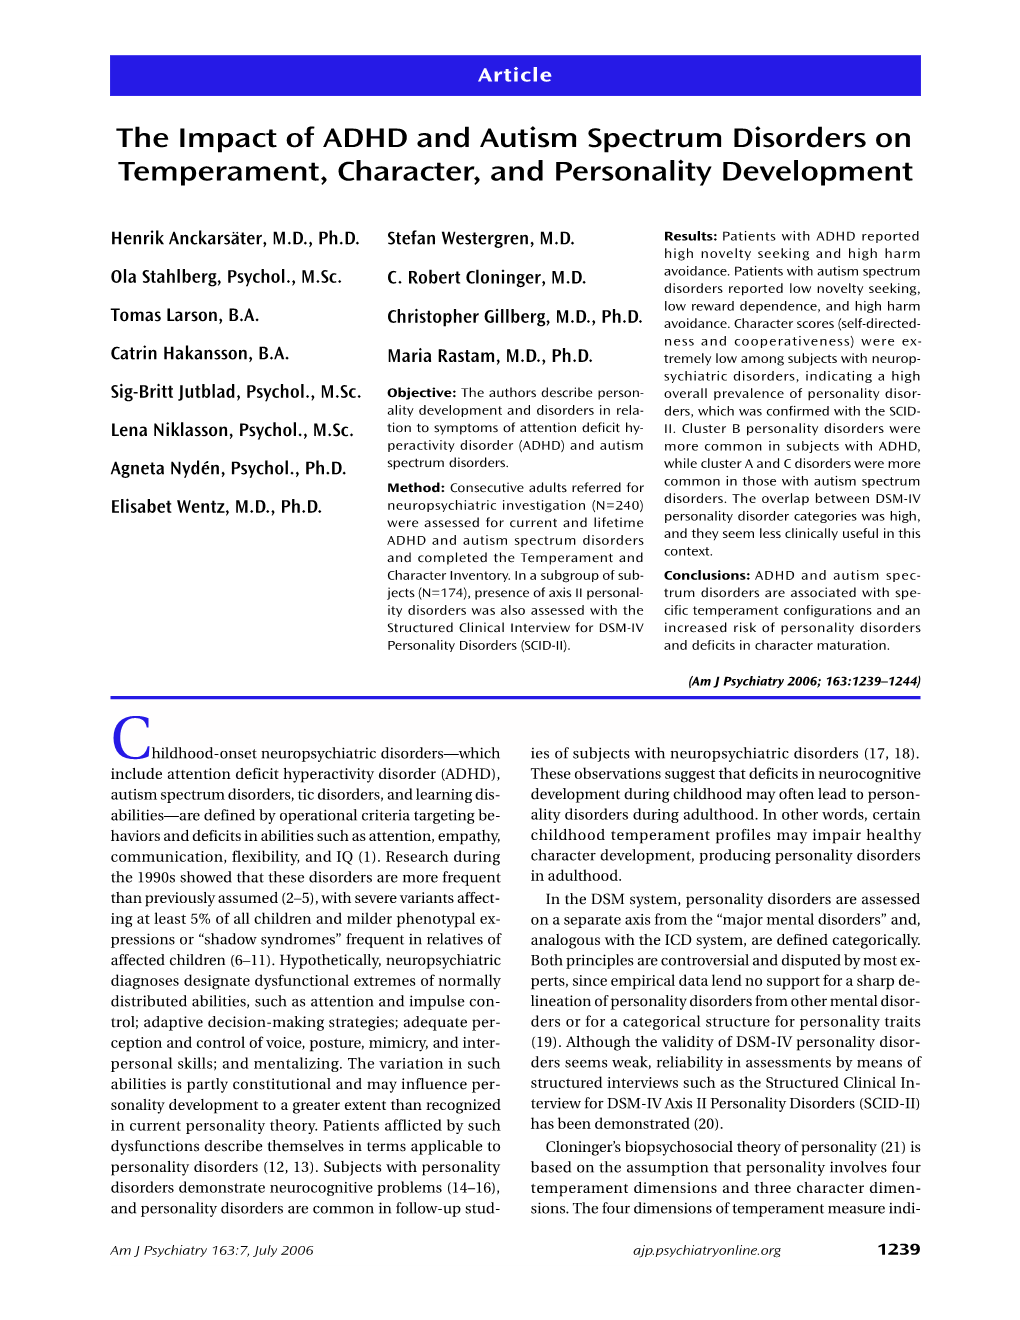 The Impact of ADHD and Autism Spectrum Disorders on Temperament, Character, and Personality Development